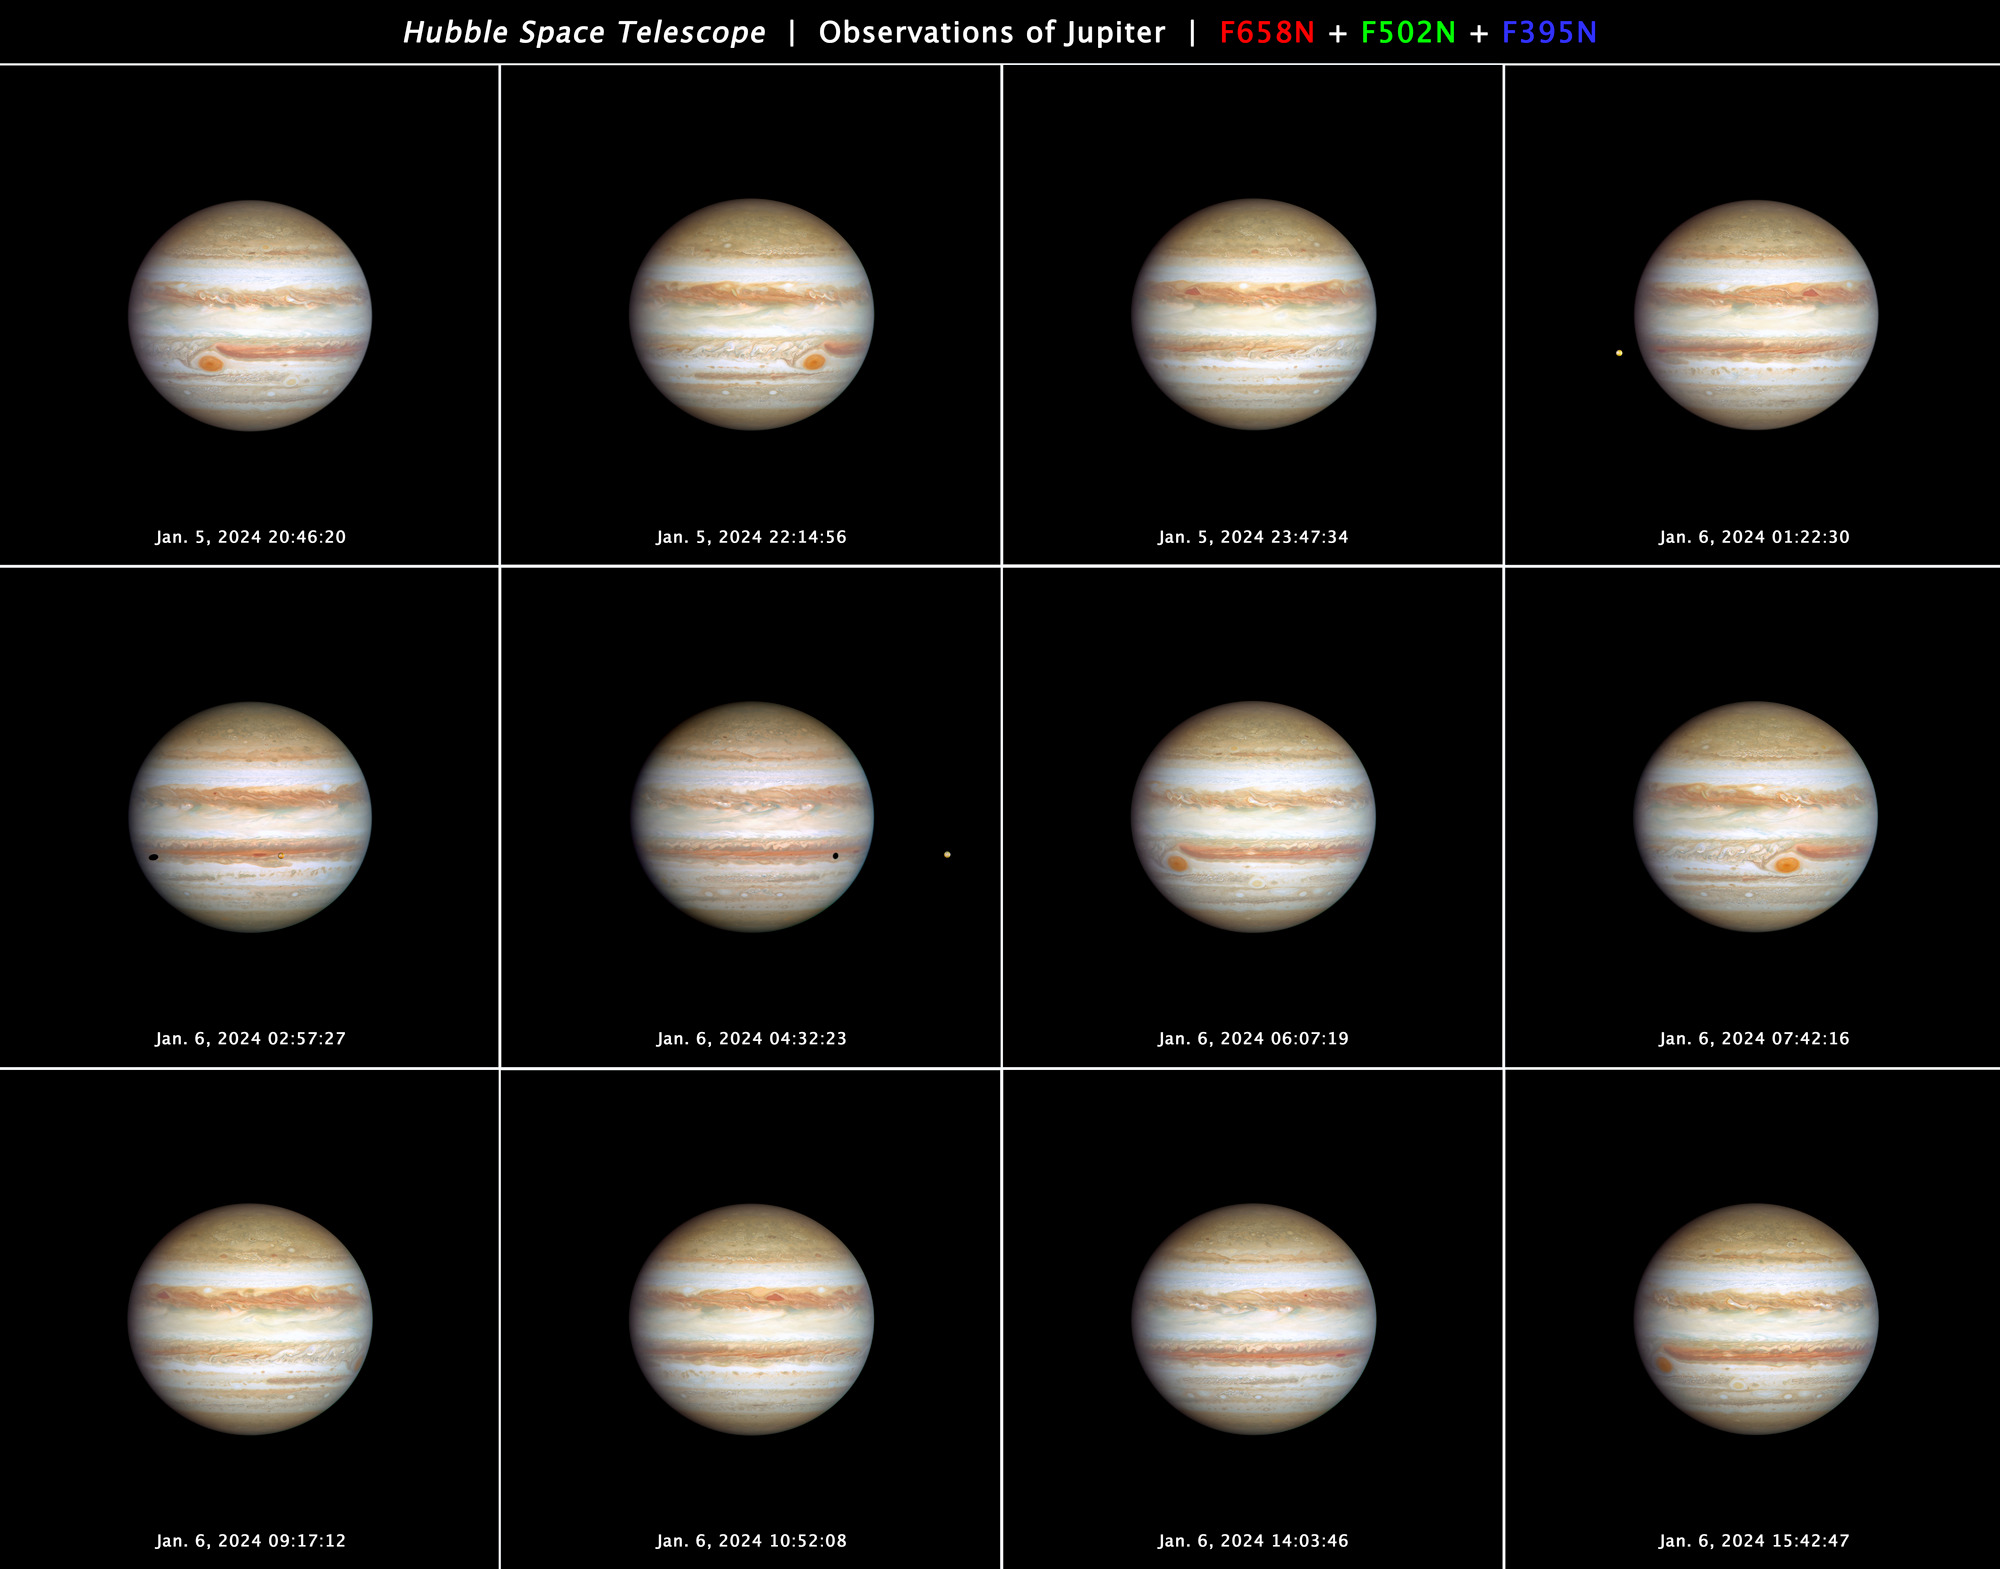 12 views of Jupiter were taken by Hubble throughout the planet's full rotation on January 5-6, 2024. At top center is the label 